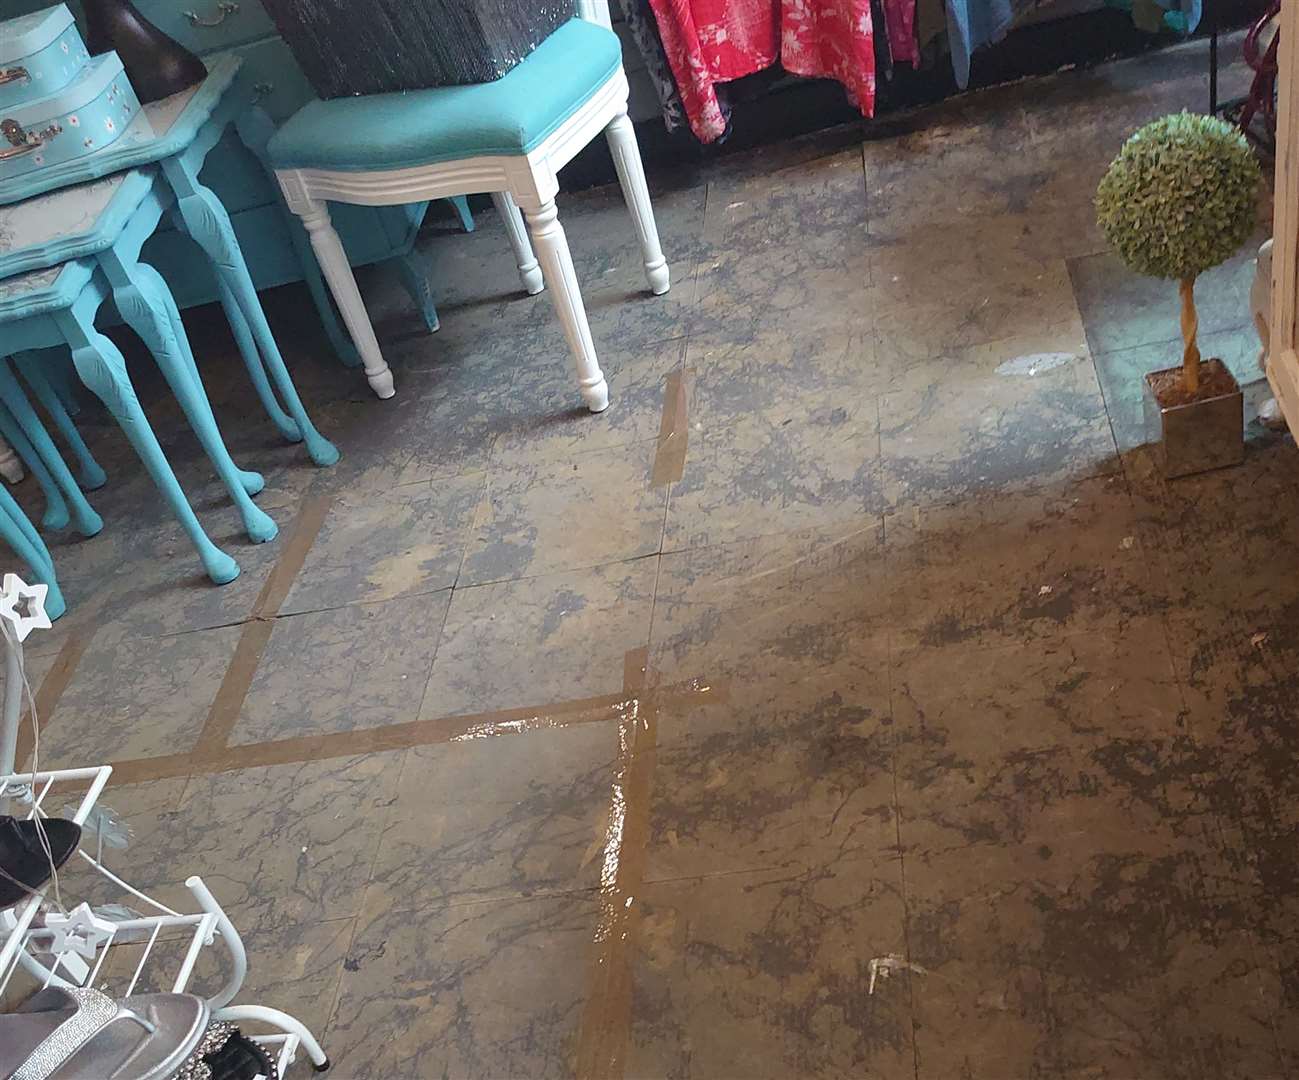 Picture shows the damaged shop floor after the carpet had to be removed